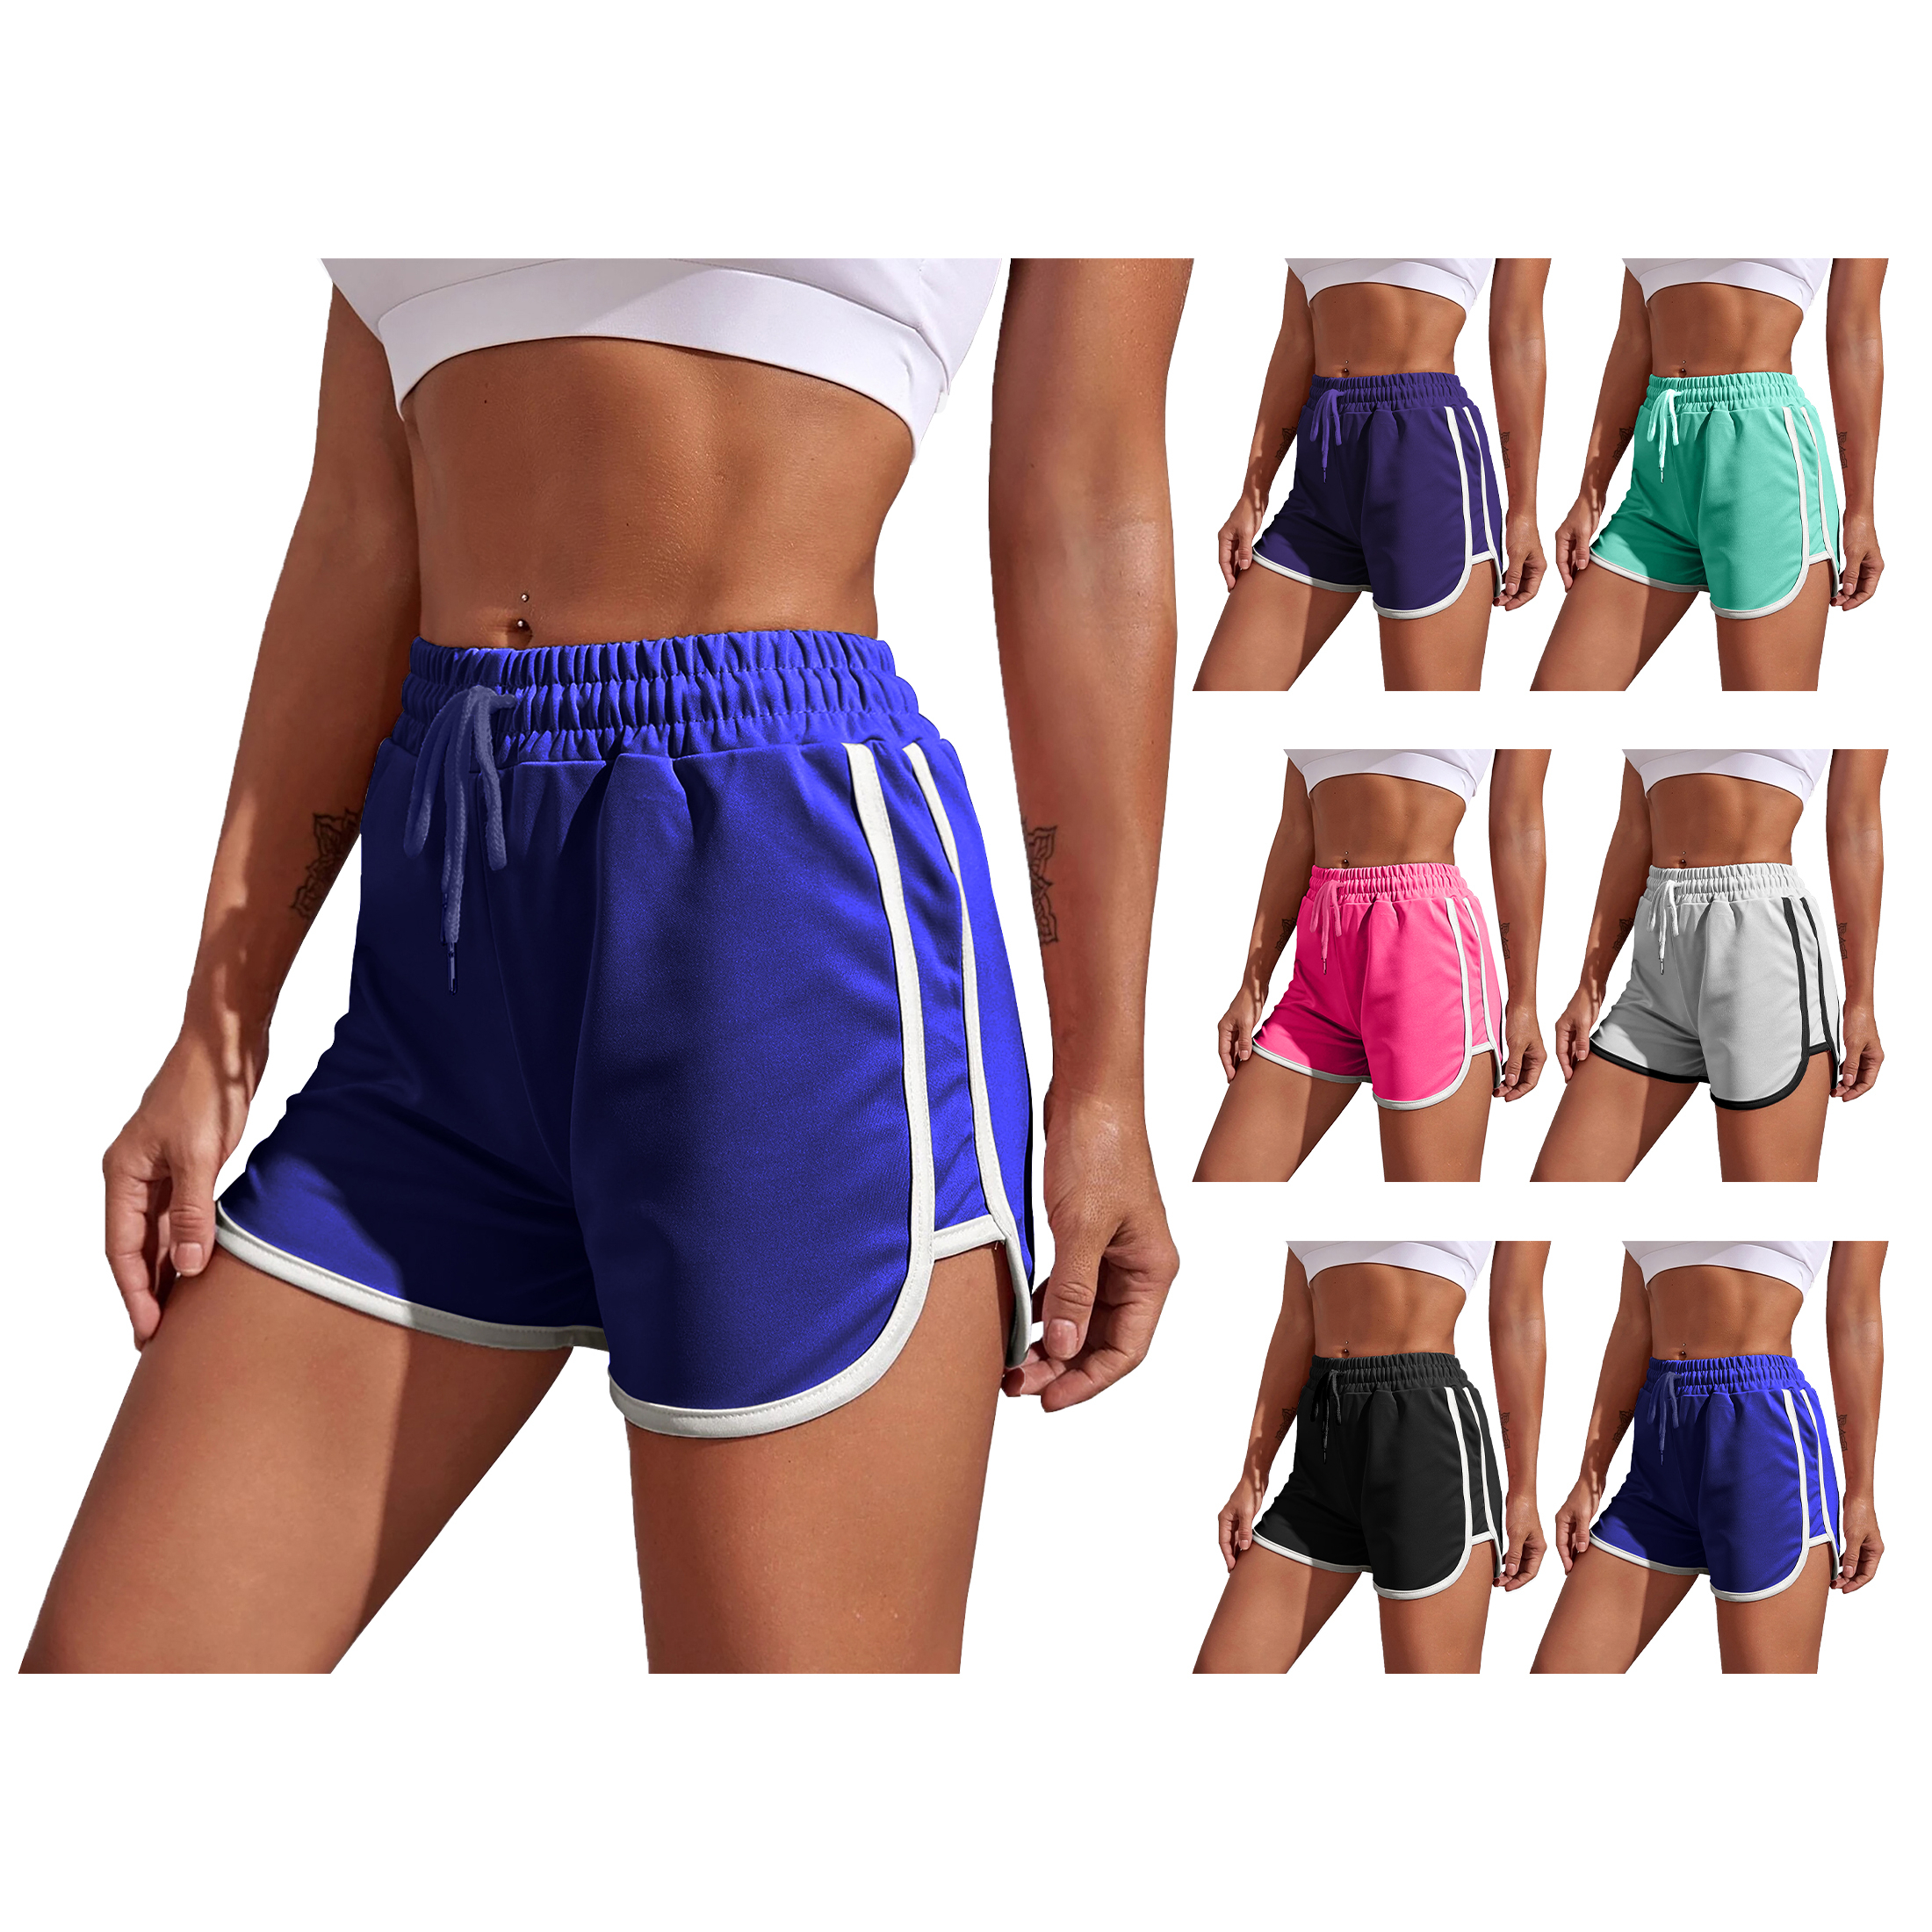 3-Pack Women's Dolphin Shorts Soft Comfy Elastic Waist Running Athletic Workout Yoga Pants - M